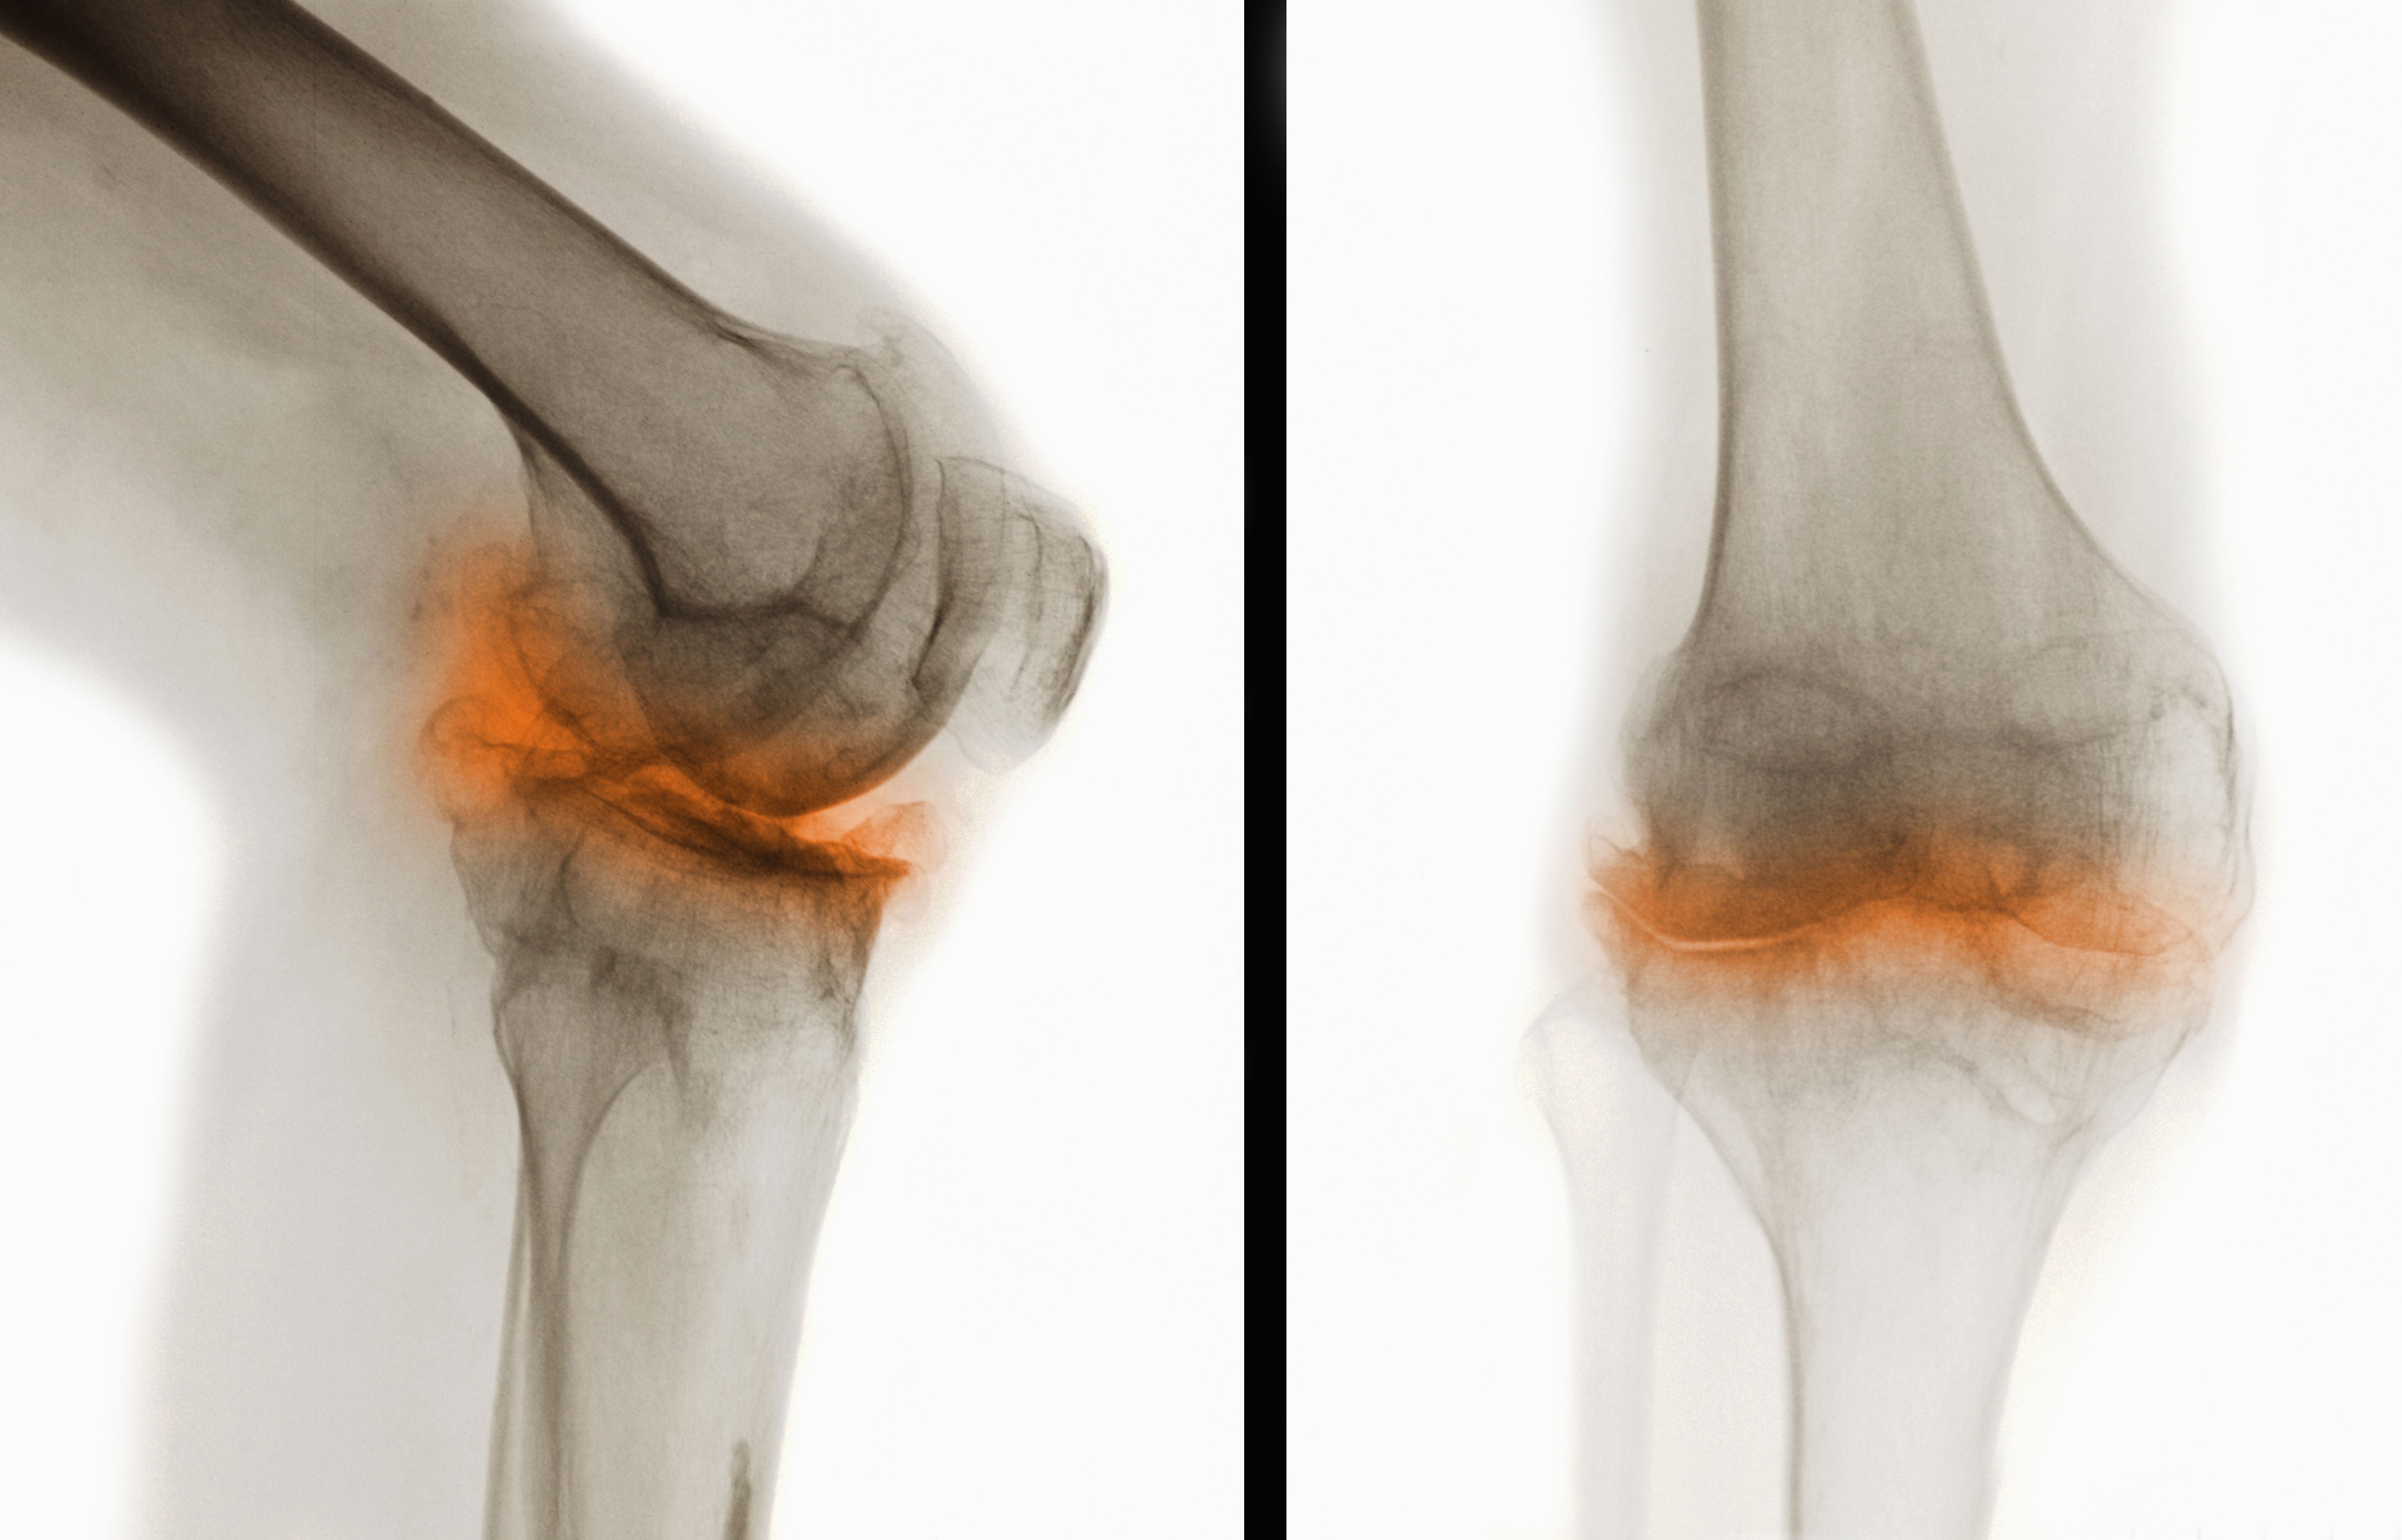 Two X Ray Radiograph Views Of Male 44 Year Old Knee With Severe Degenerative Osteoarthritic Changes 123534572 599da7dad088c0001096df6c 